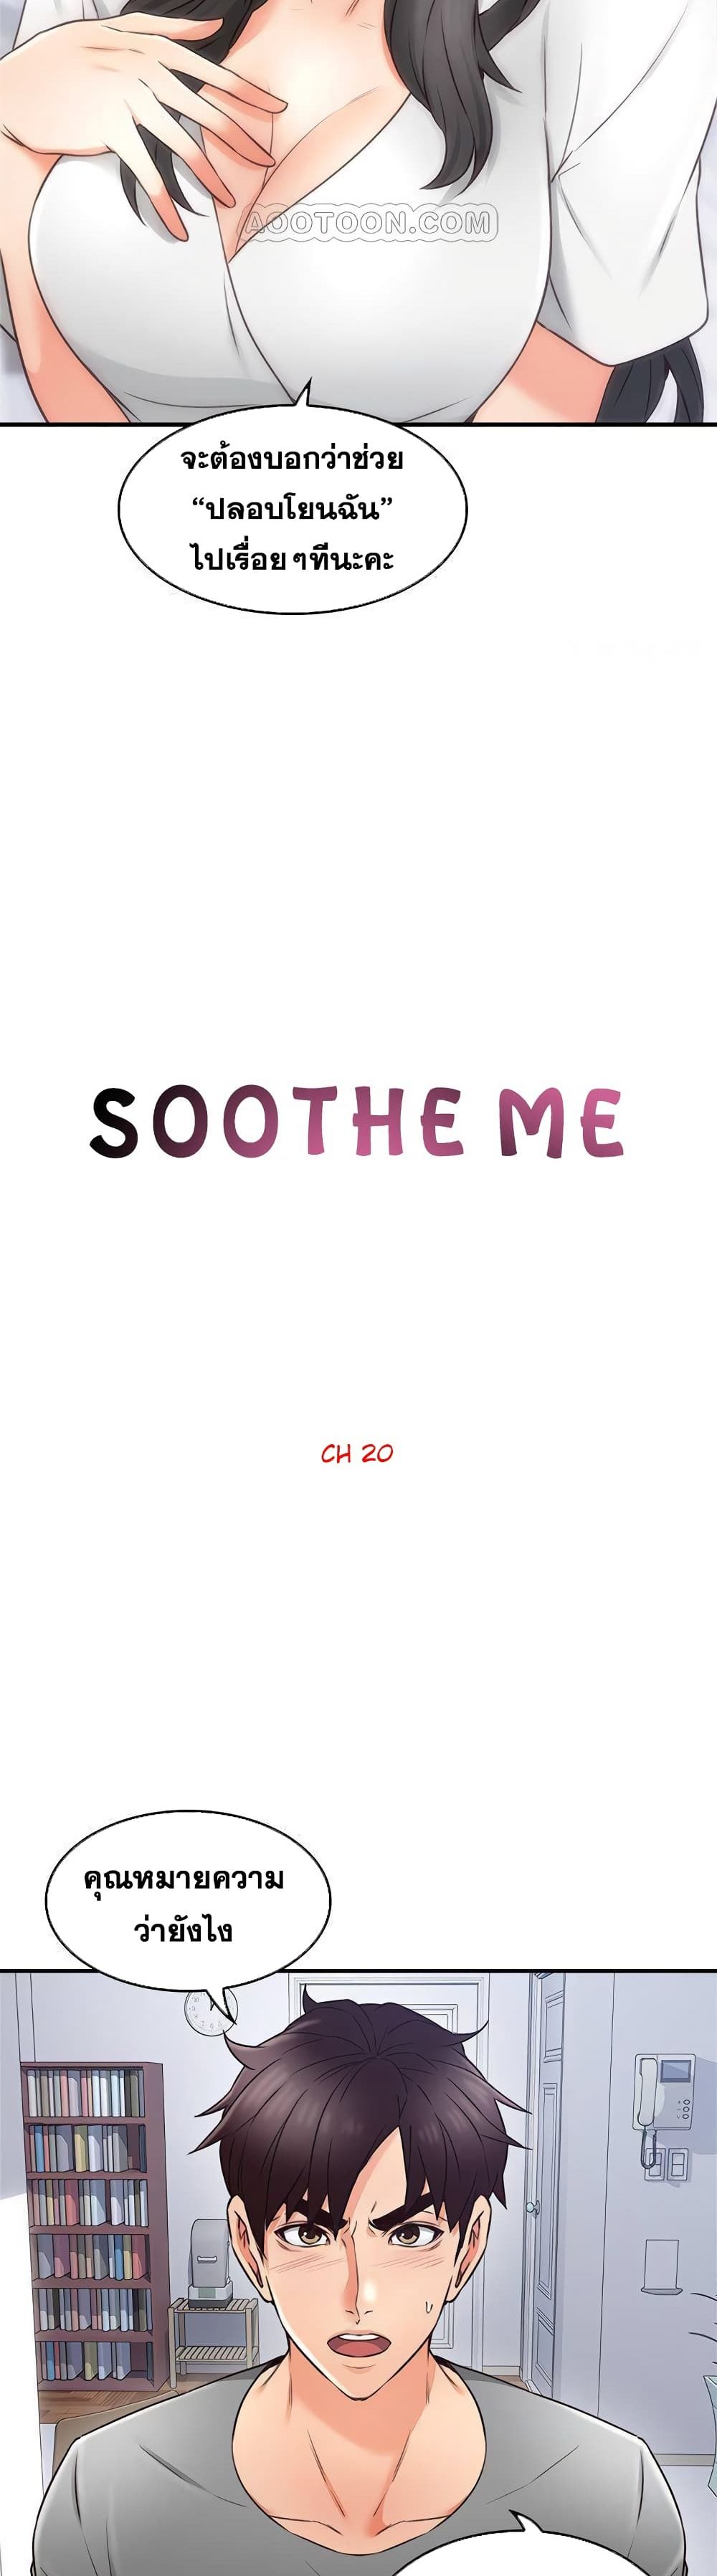 Soothe Me! 20-20